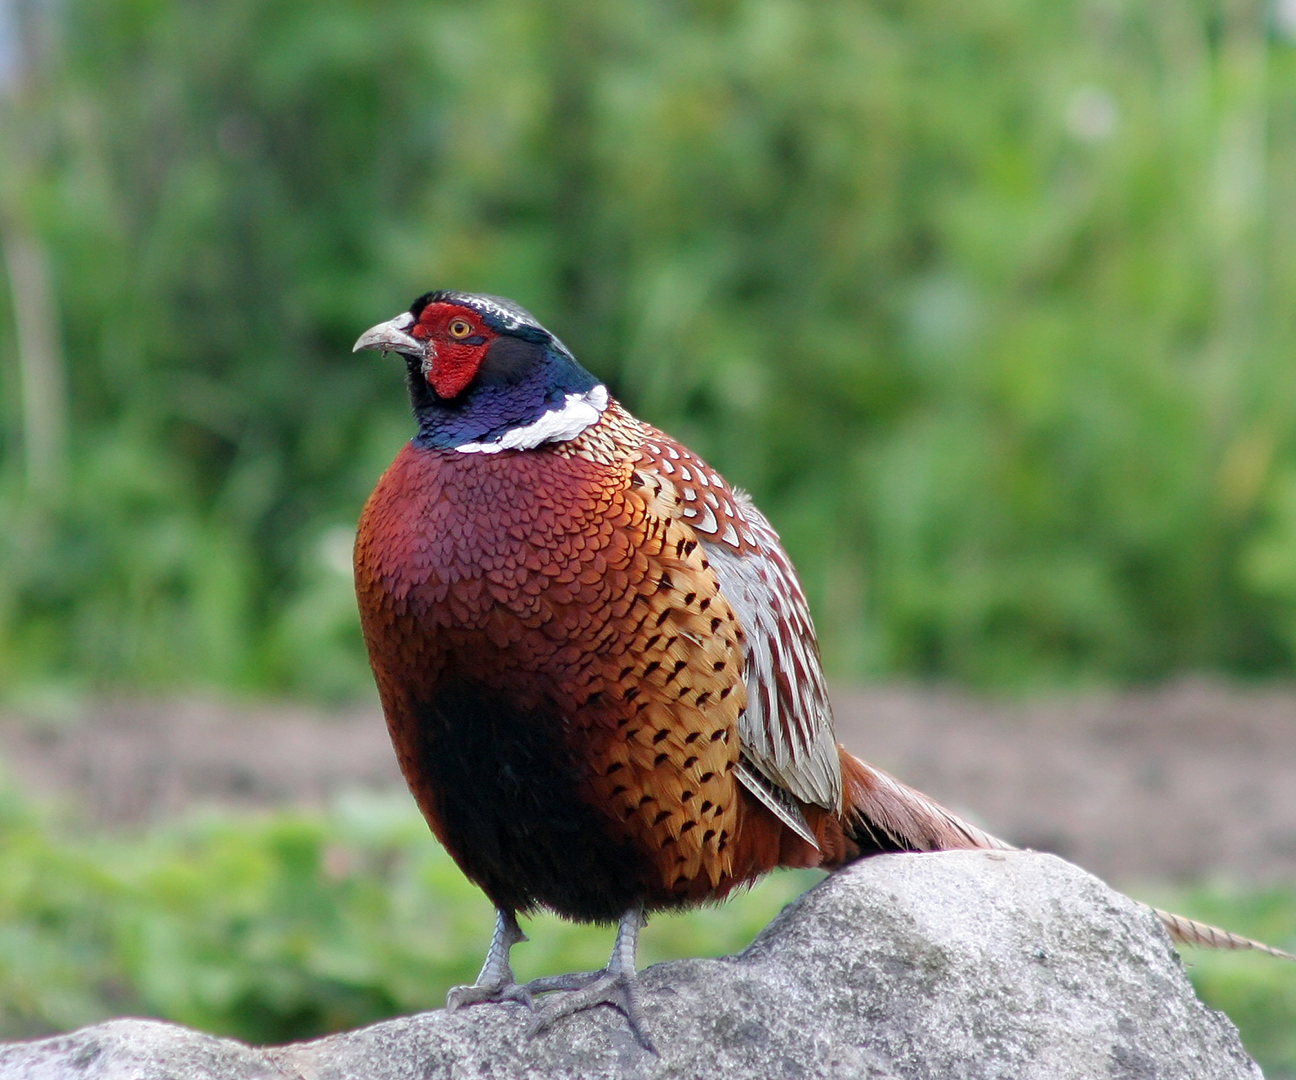 colorful bird with brown and blue feathers sitting on top of a rock